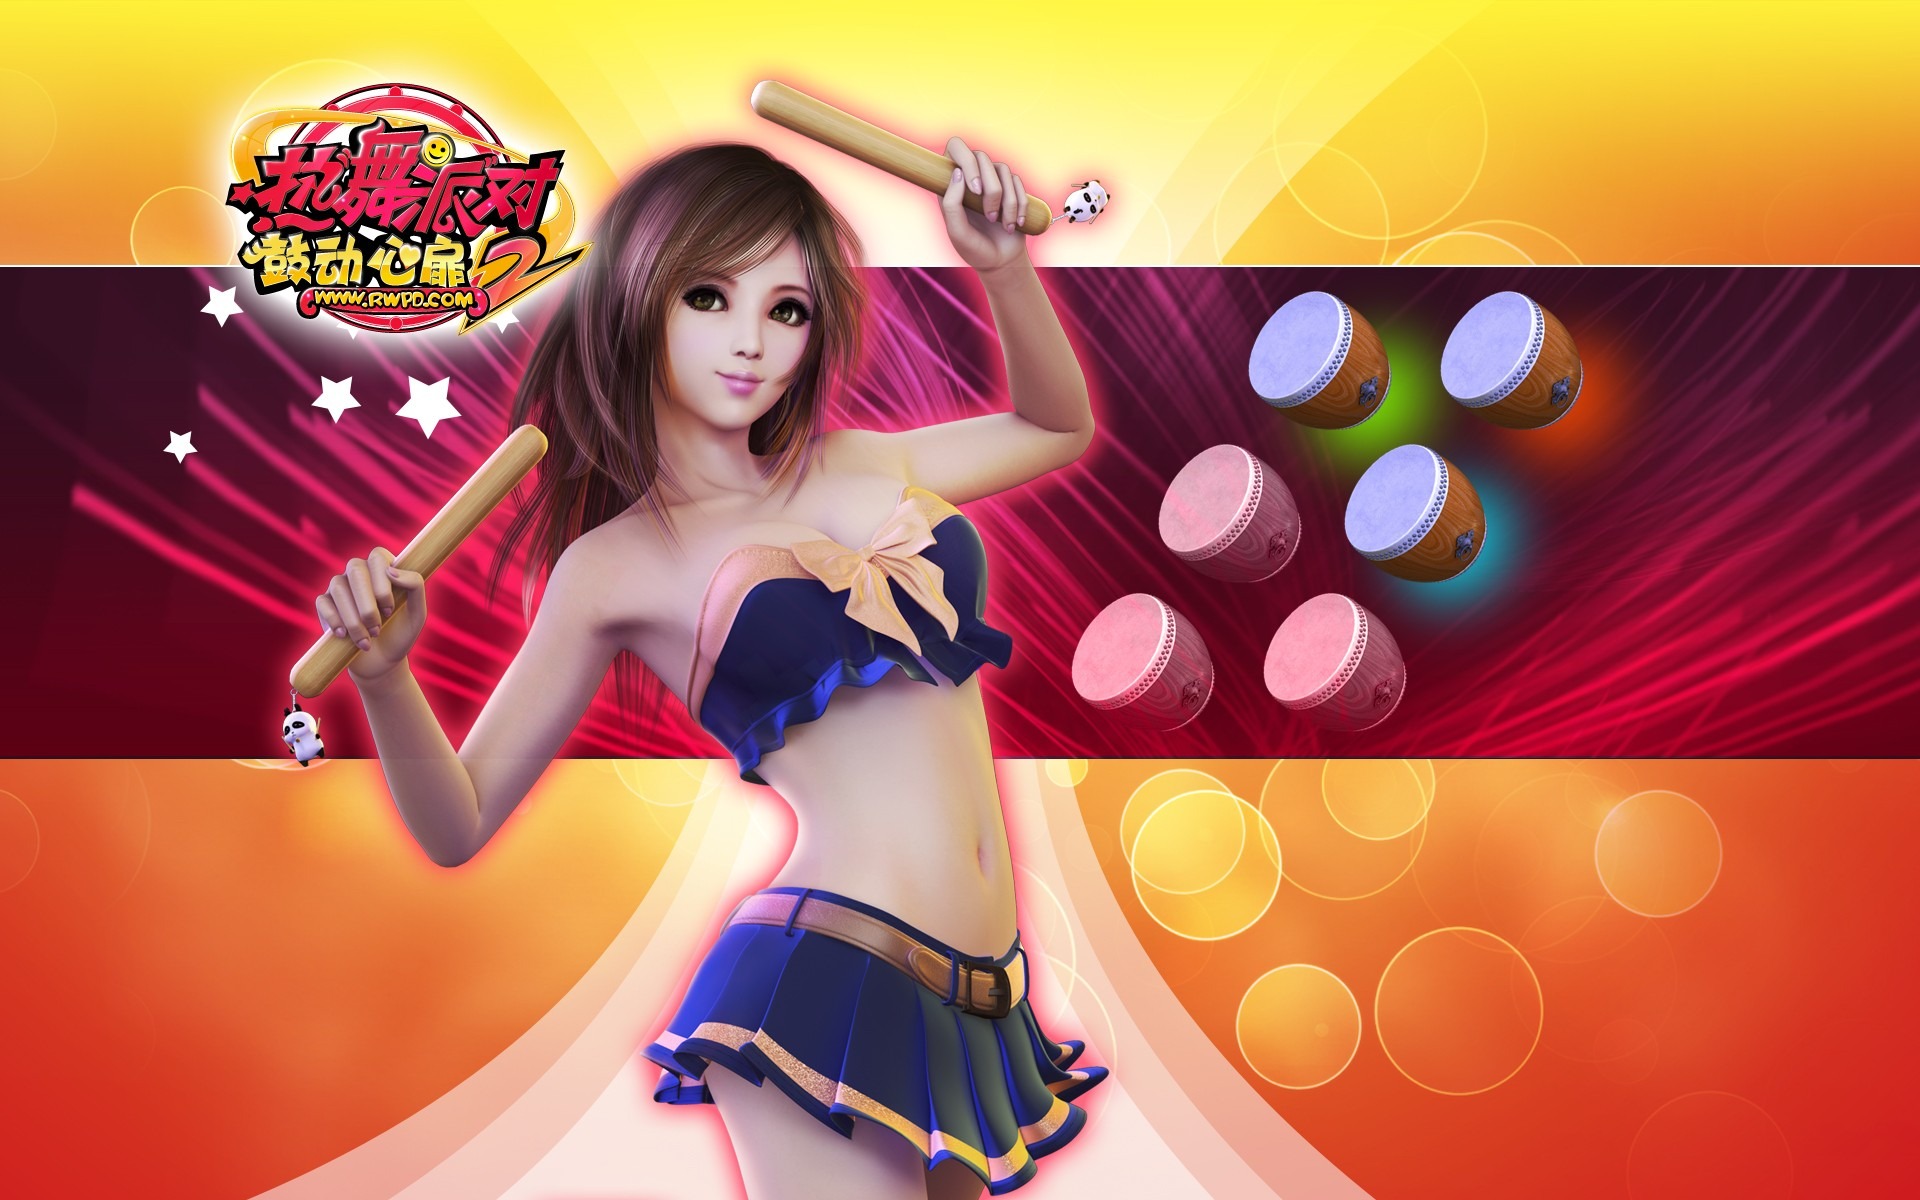 Online game Hot Dance Party II official wallpapers #13 - 1920x1200